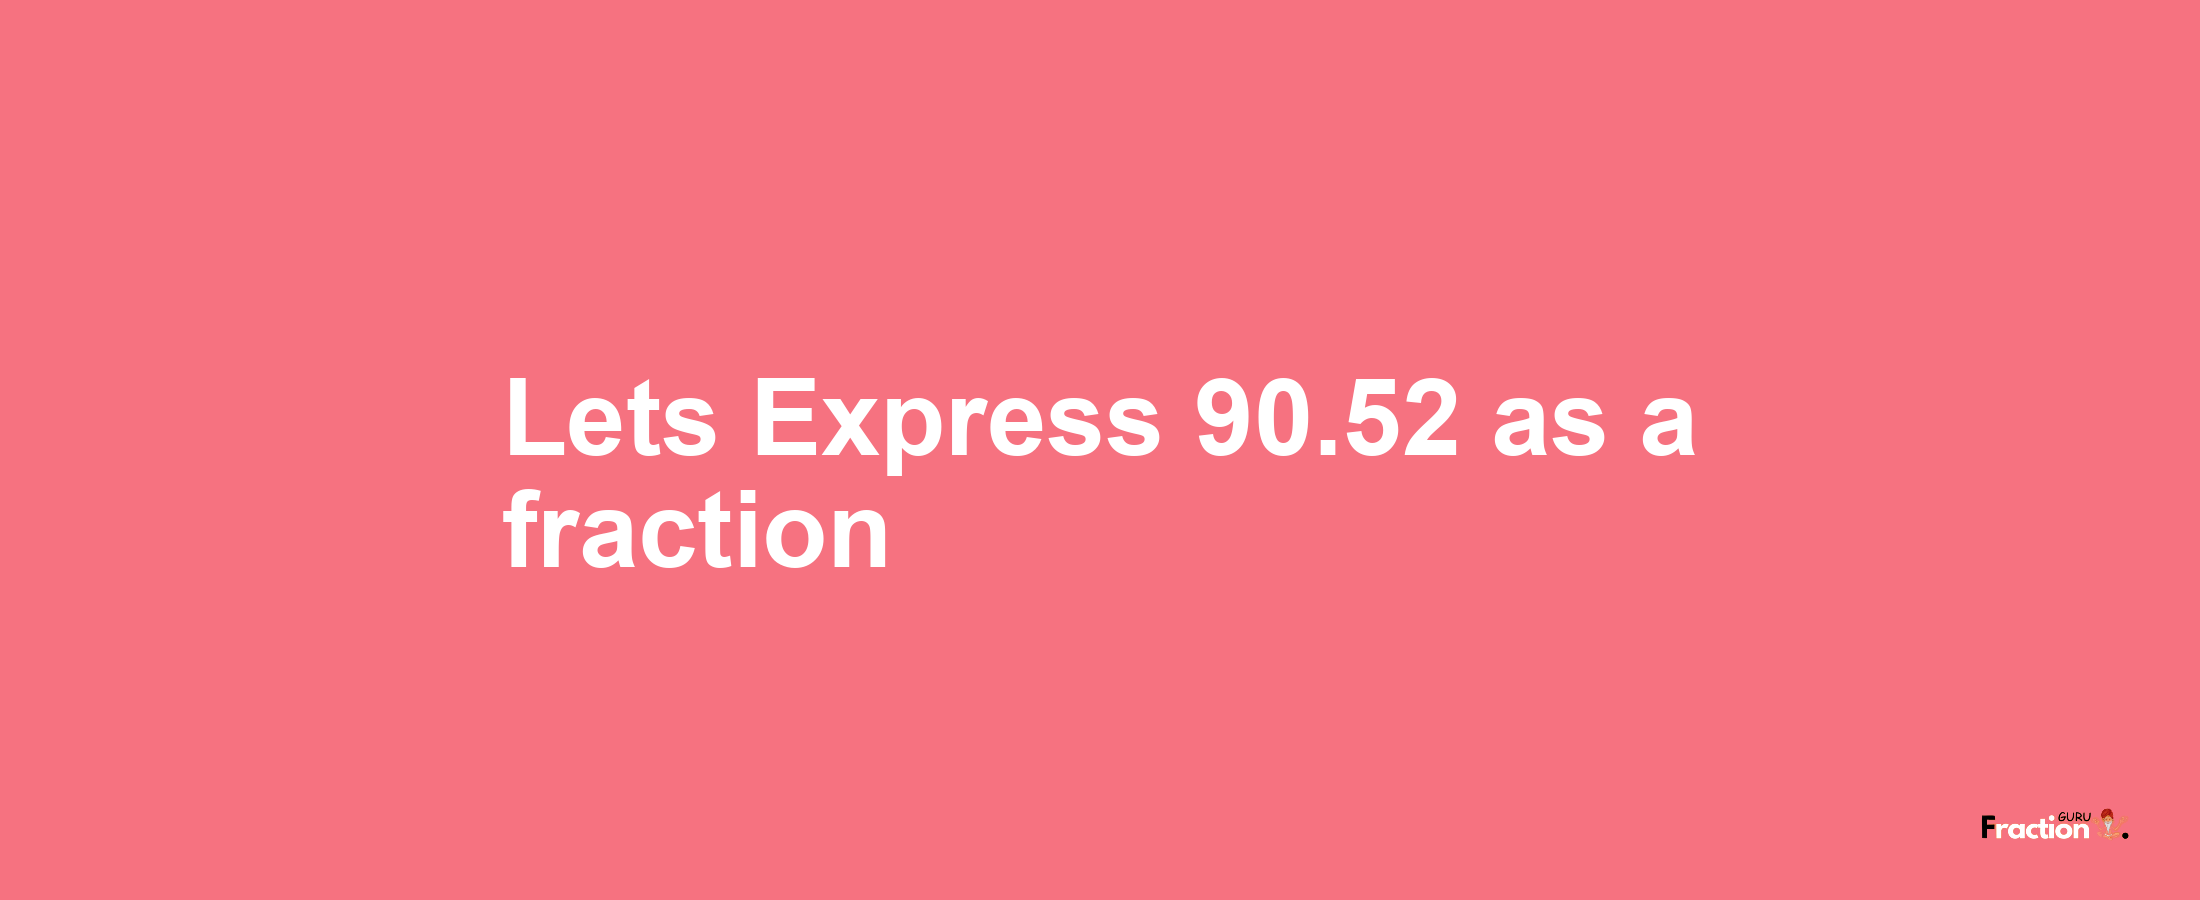 Lets Express 90.52 as afraction